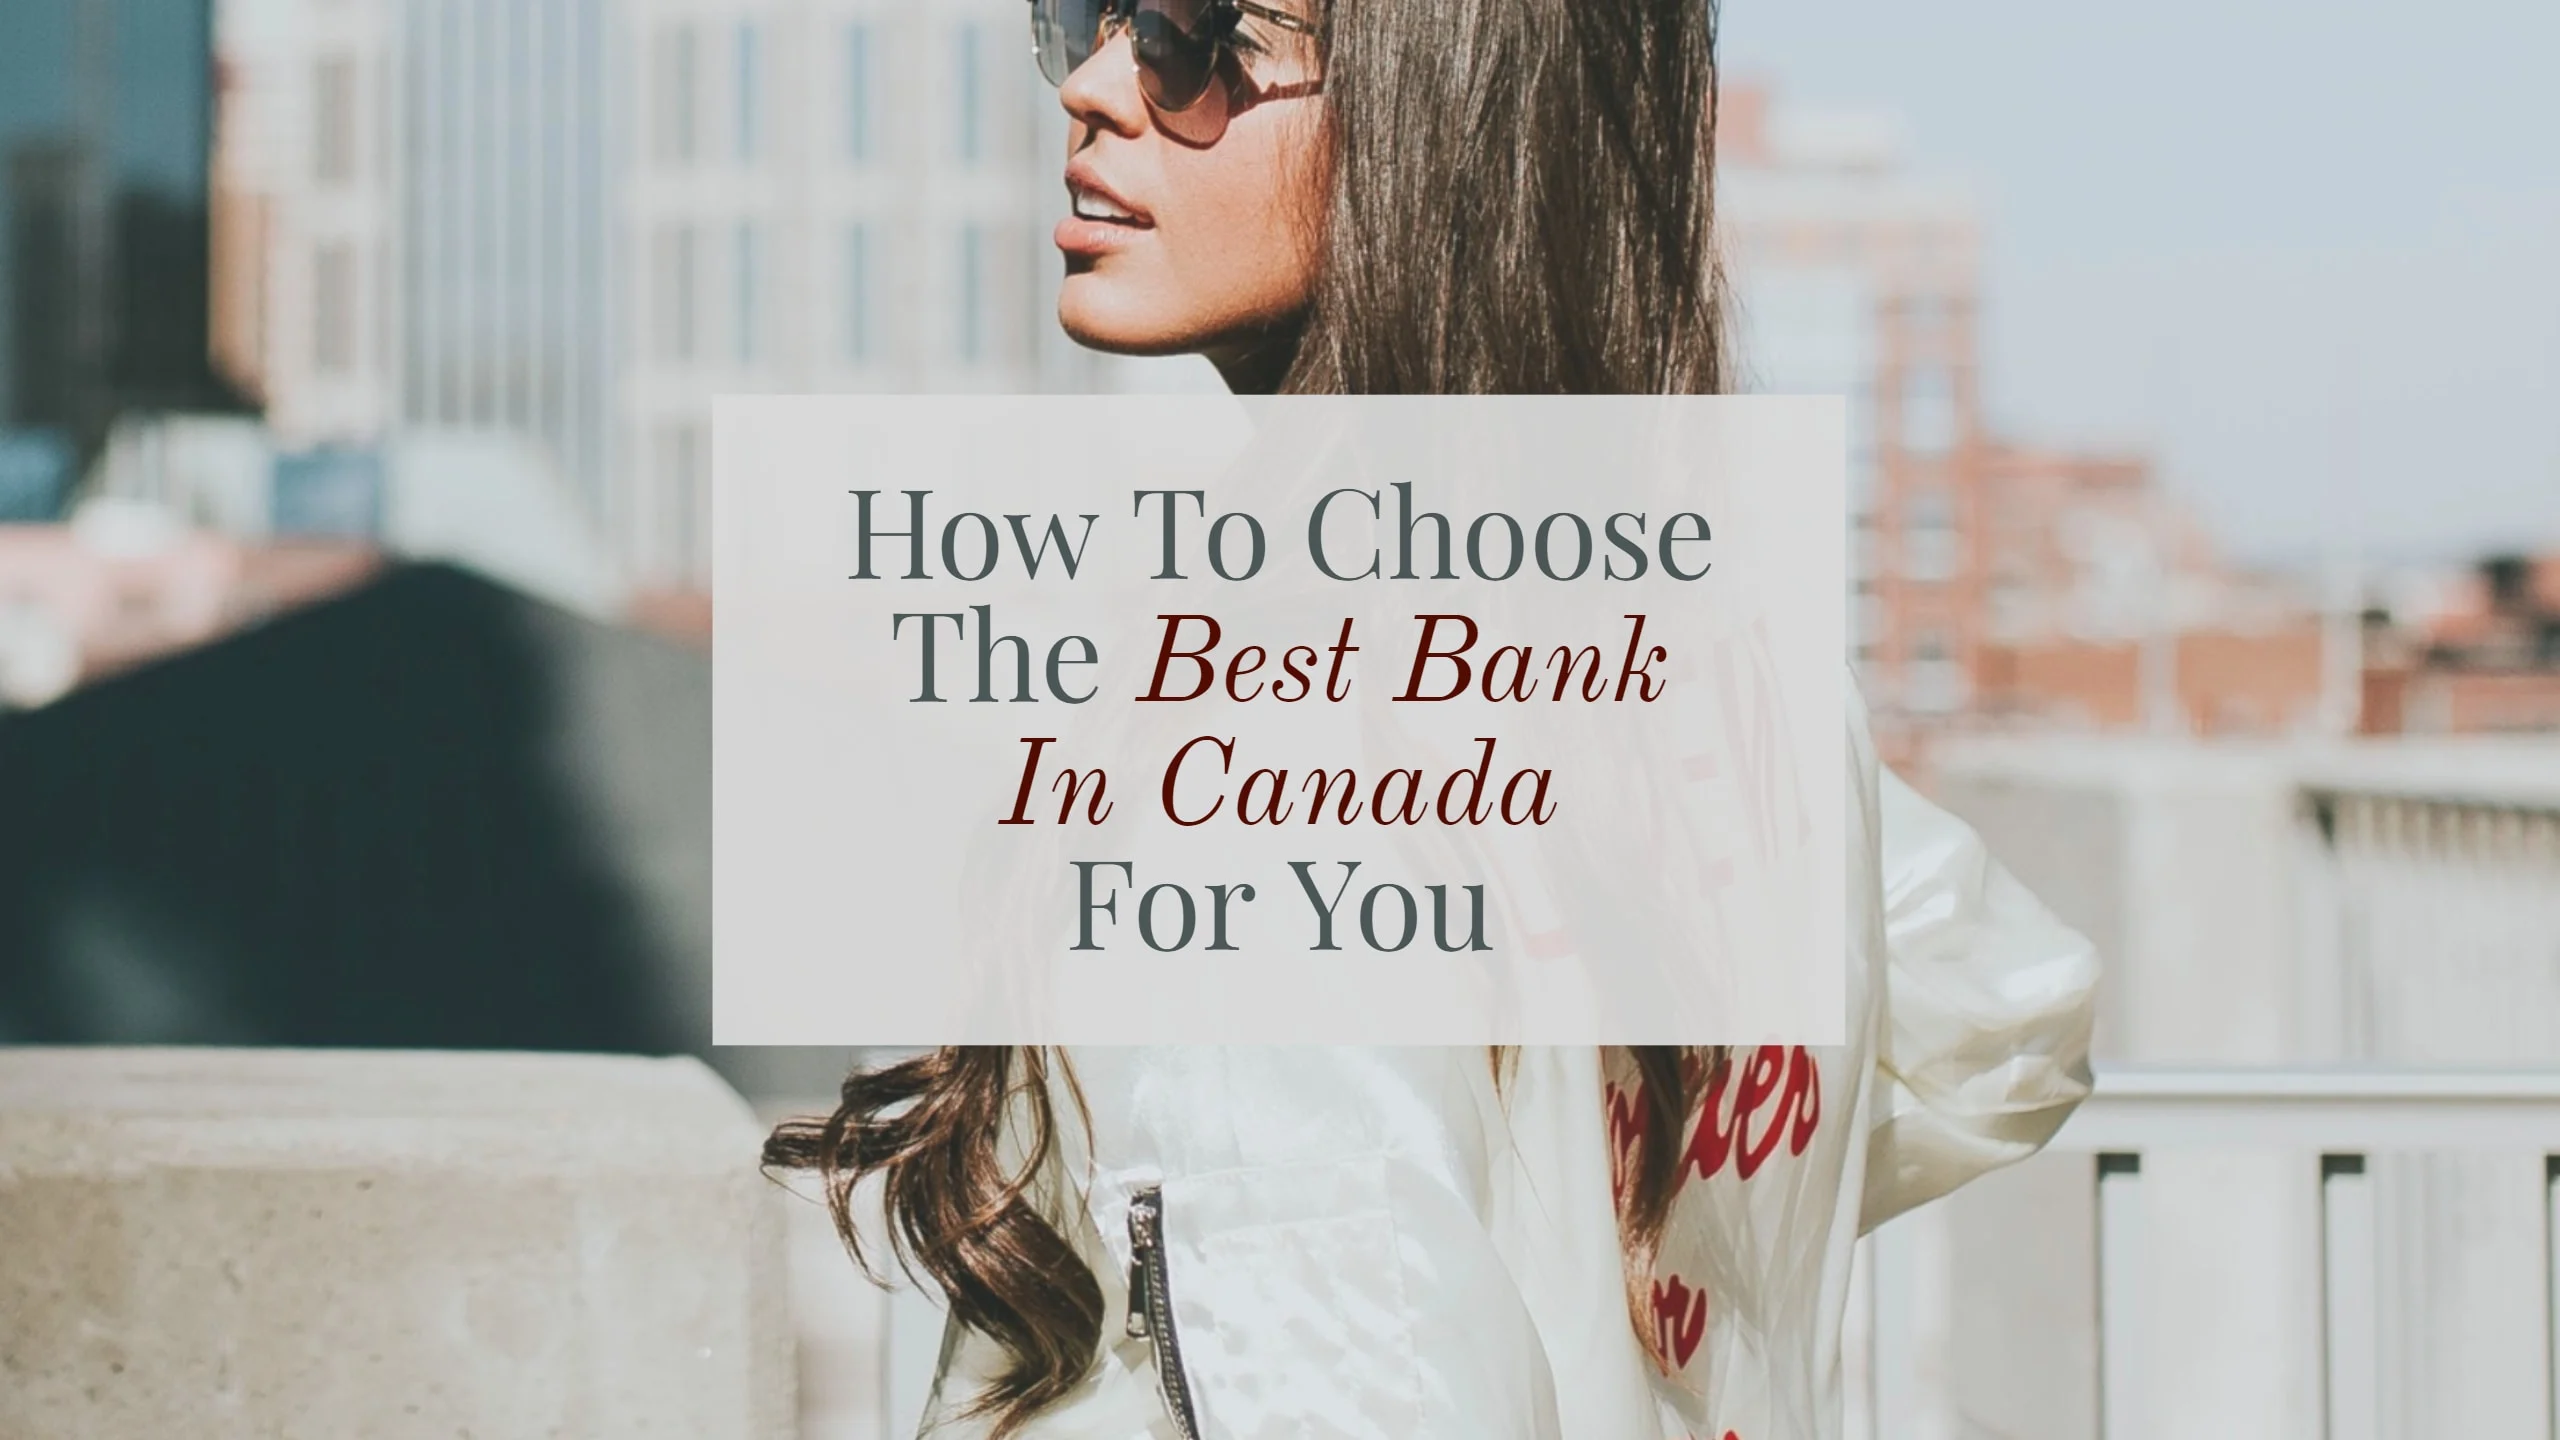 How To Choose The Best Bank In Canada And Save Money - Best Bank In Canada For Newcomers